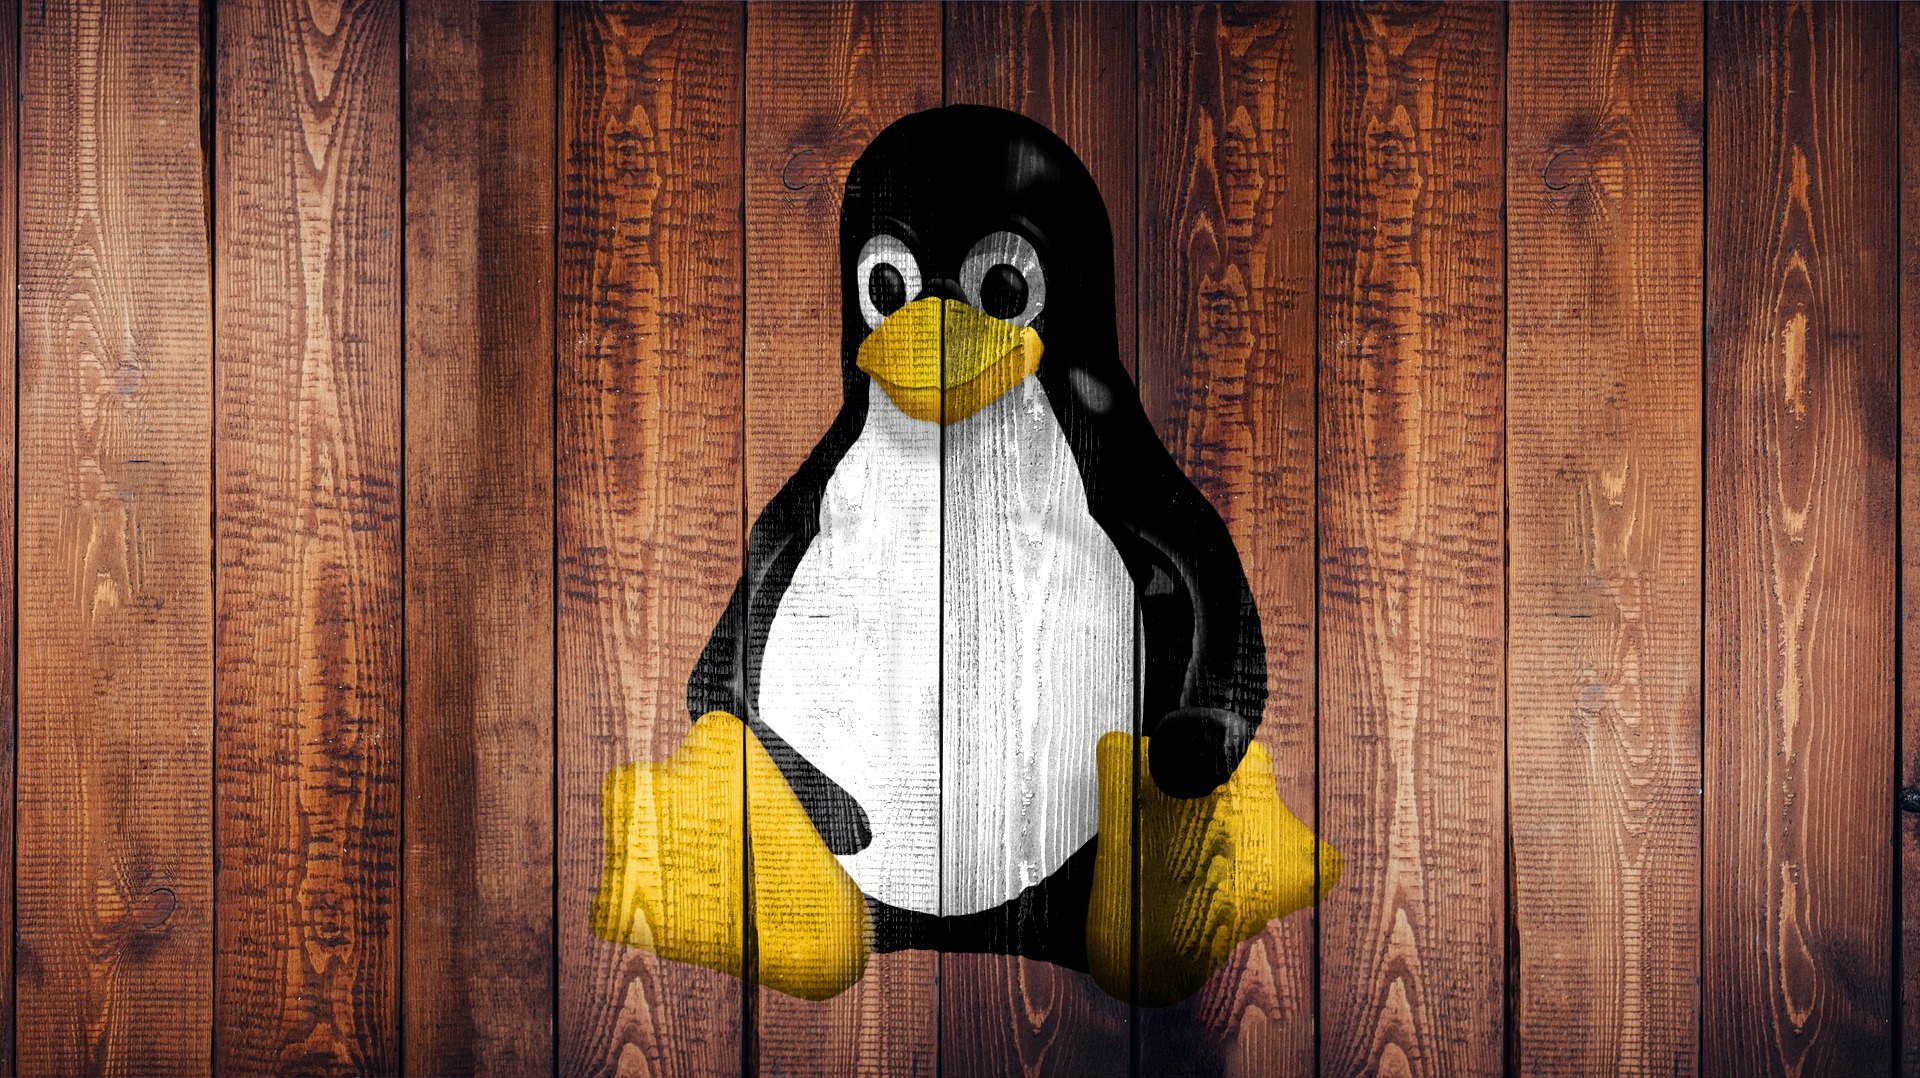 Tux on wood - Image by User 2023583 at Pixabay